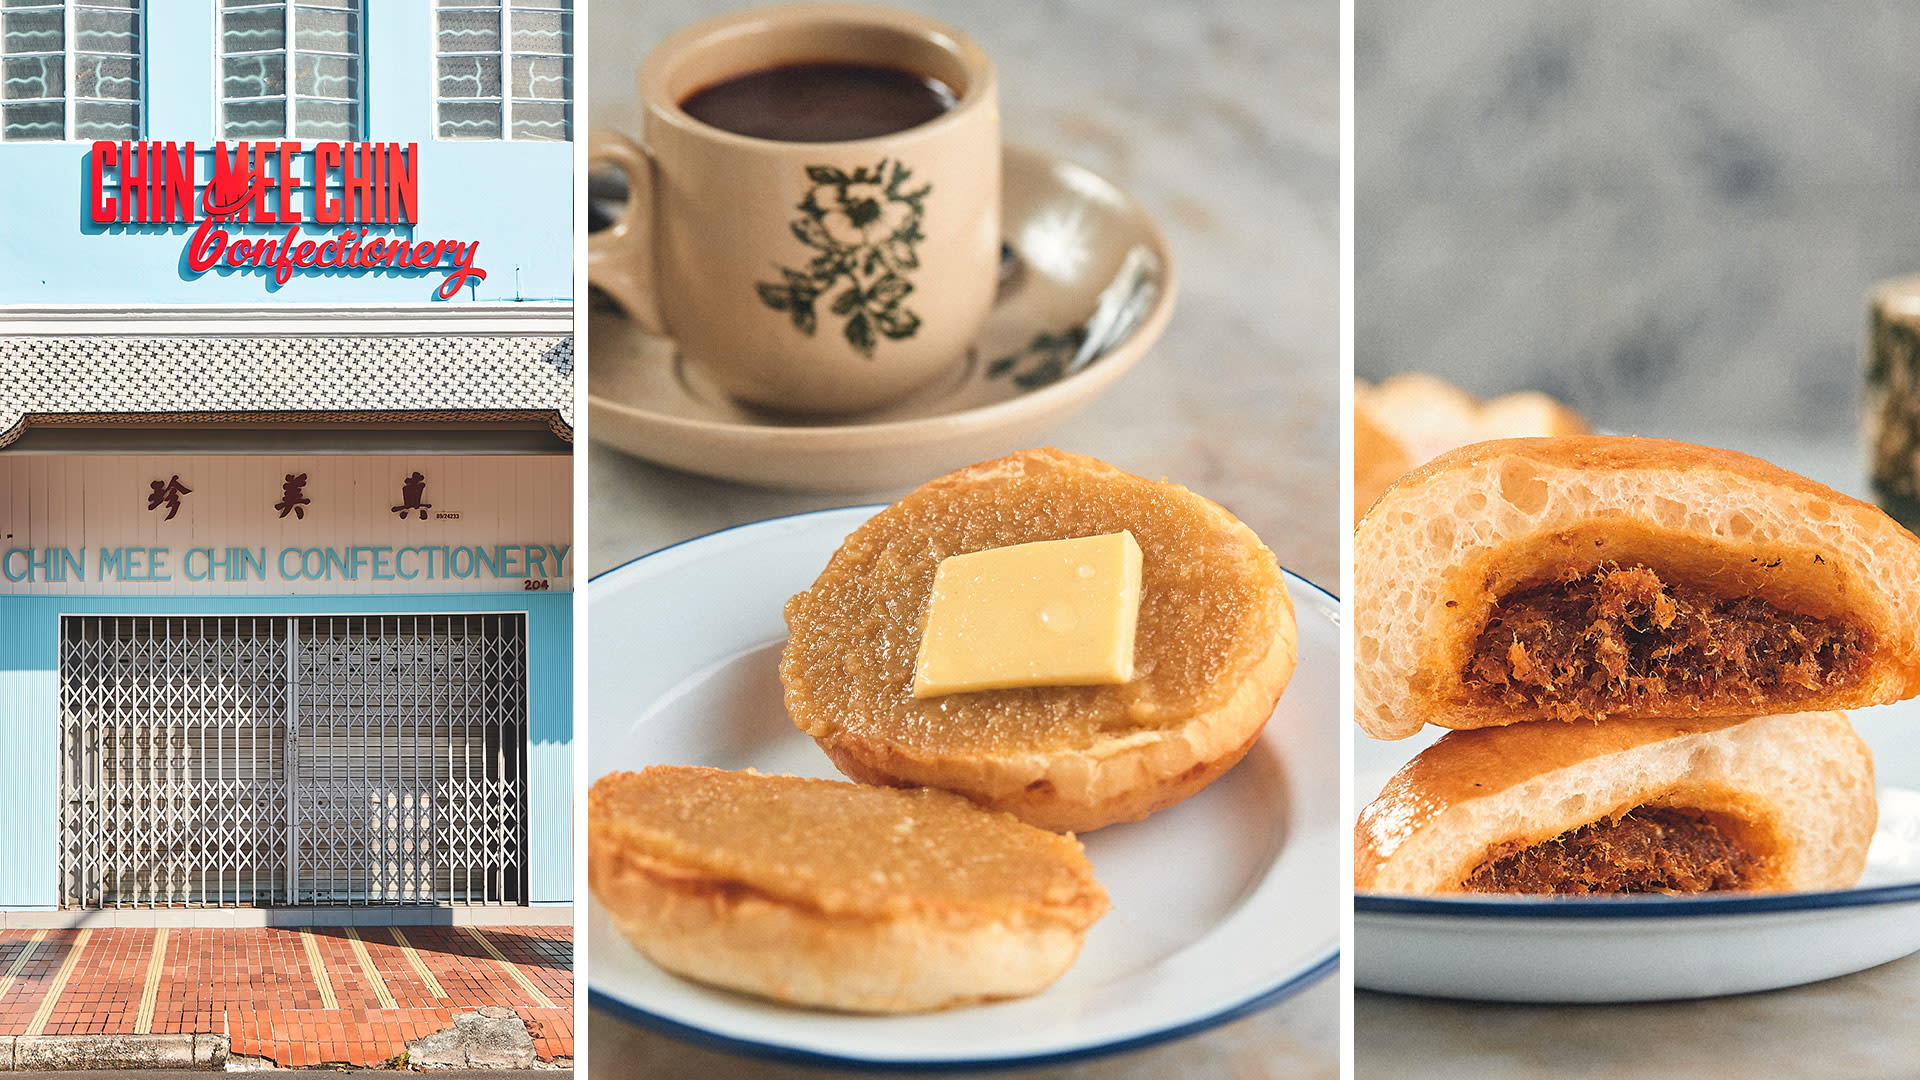 At The Reopened Chin Mee Chin Confectionery, Charcoal-Toasted Kaya Buns & Nostalgia Still Rule